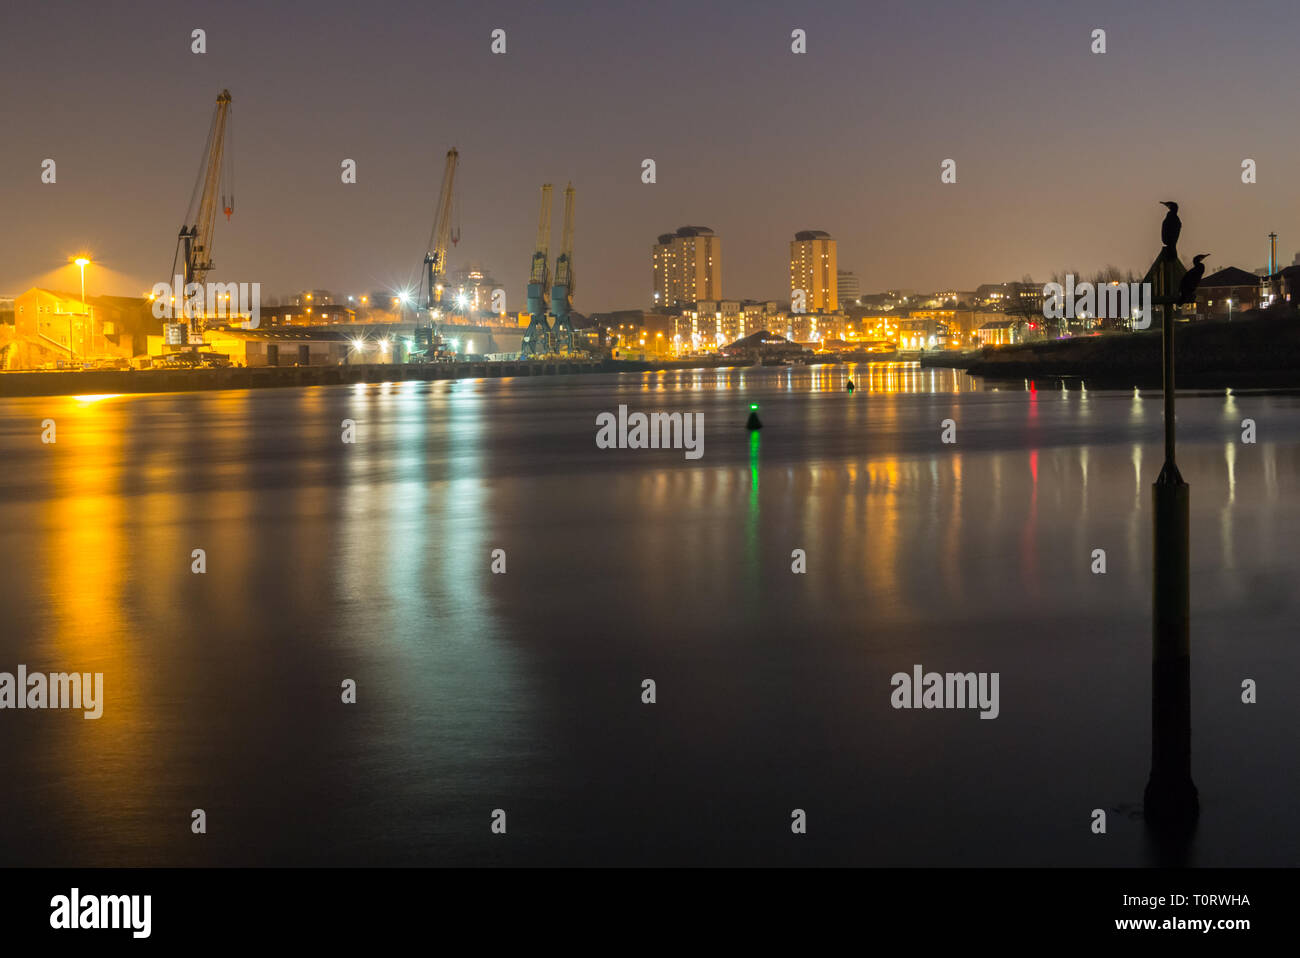 A Nighttime Riverscape of the River Wear, Sunderland Stock Photo